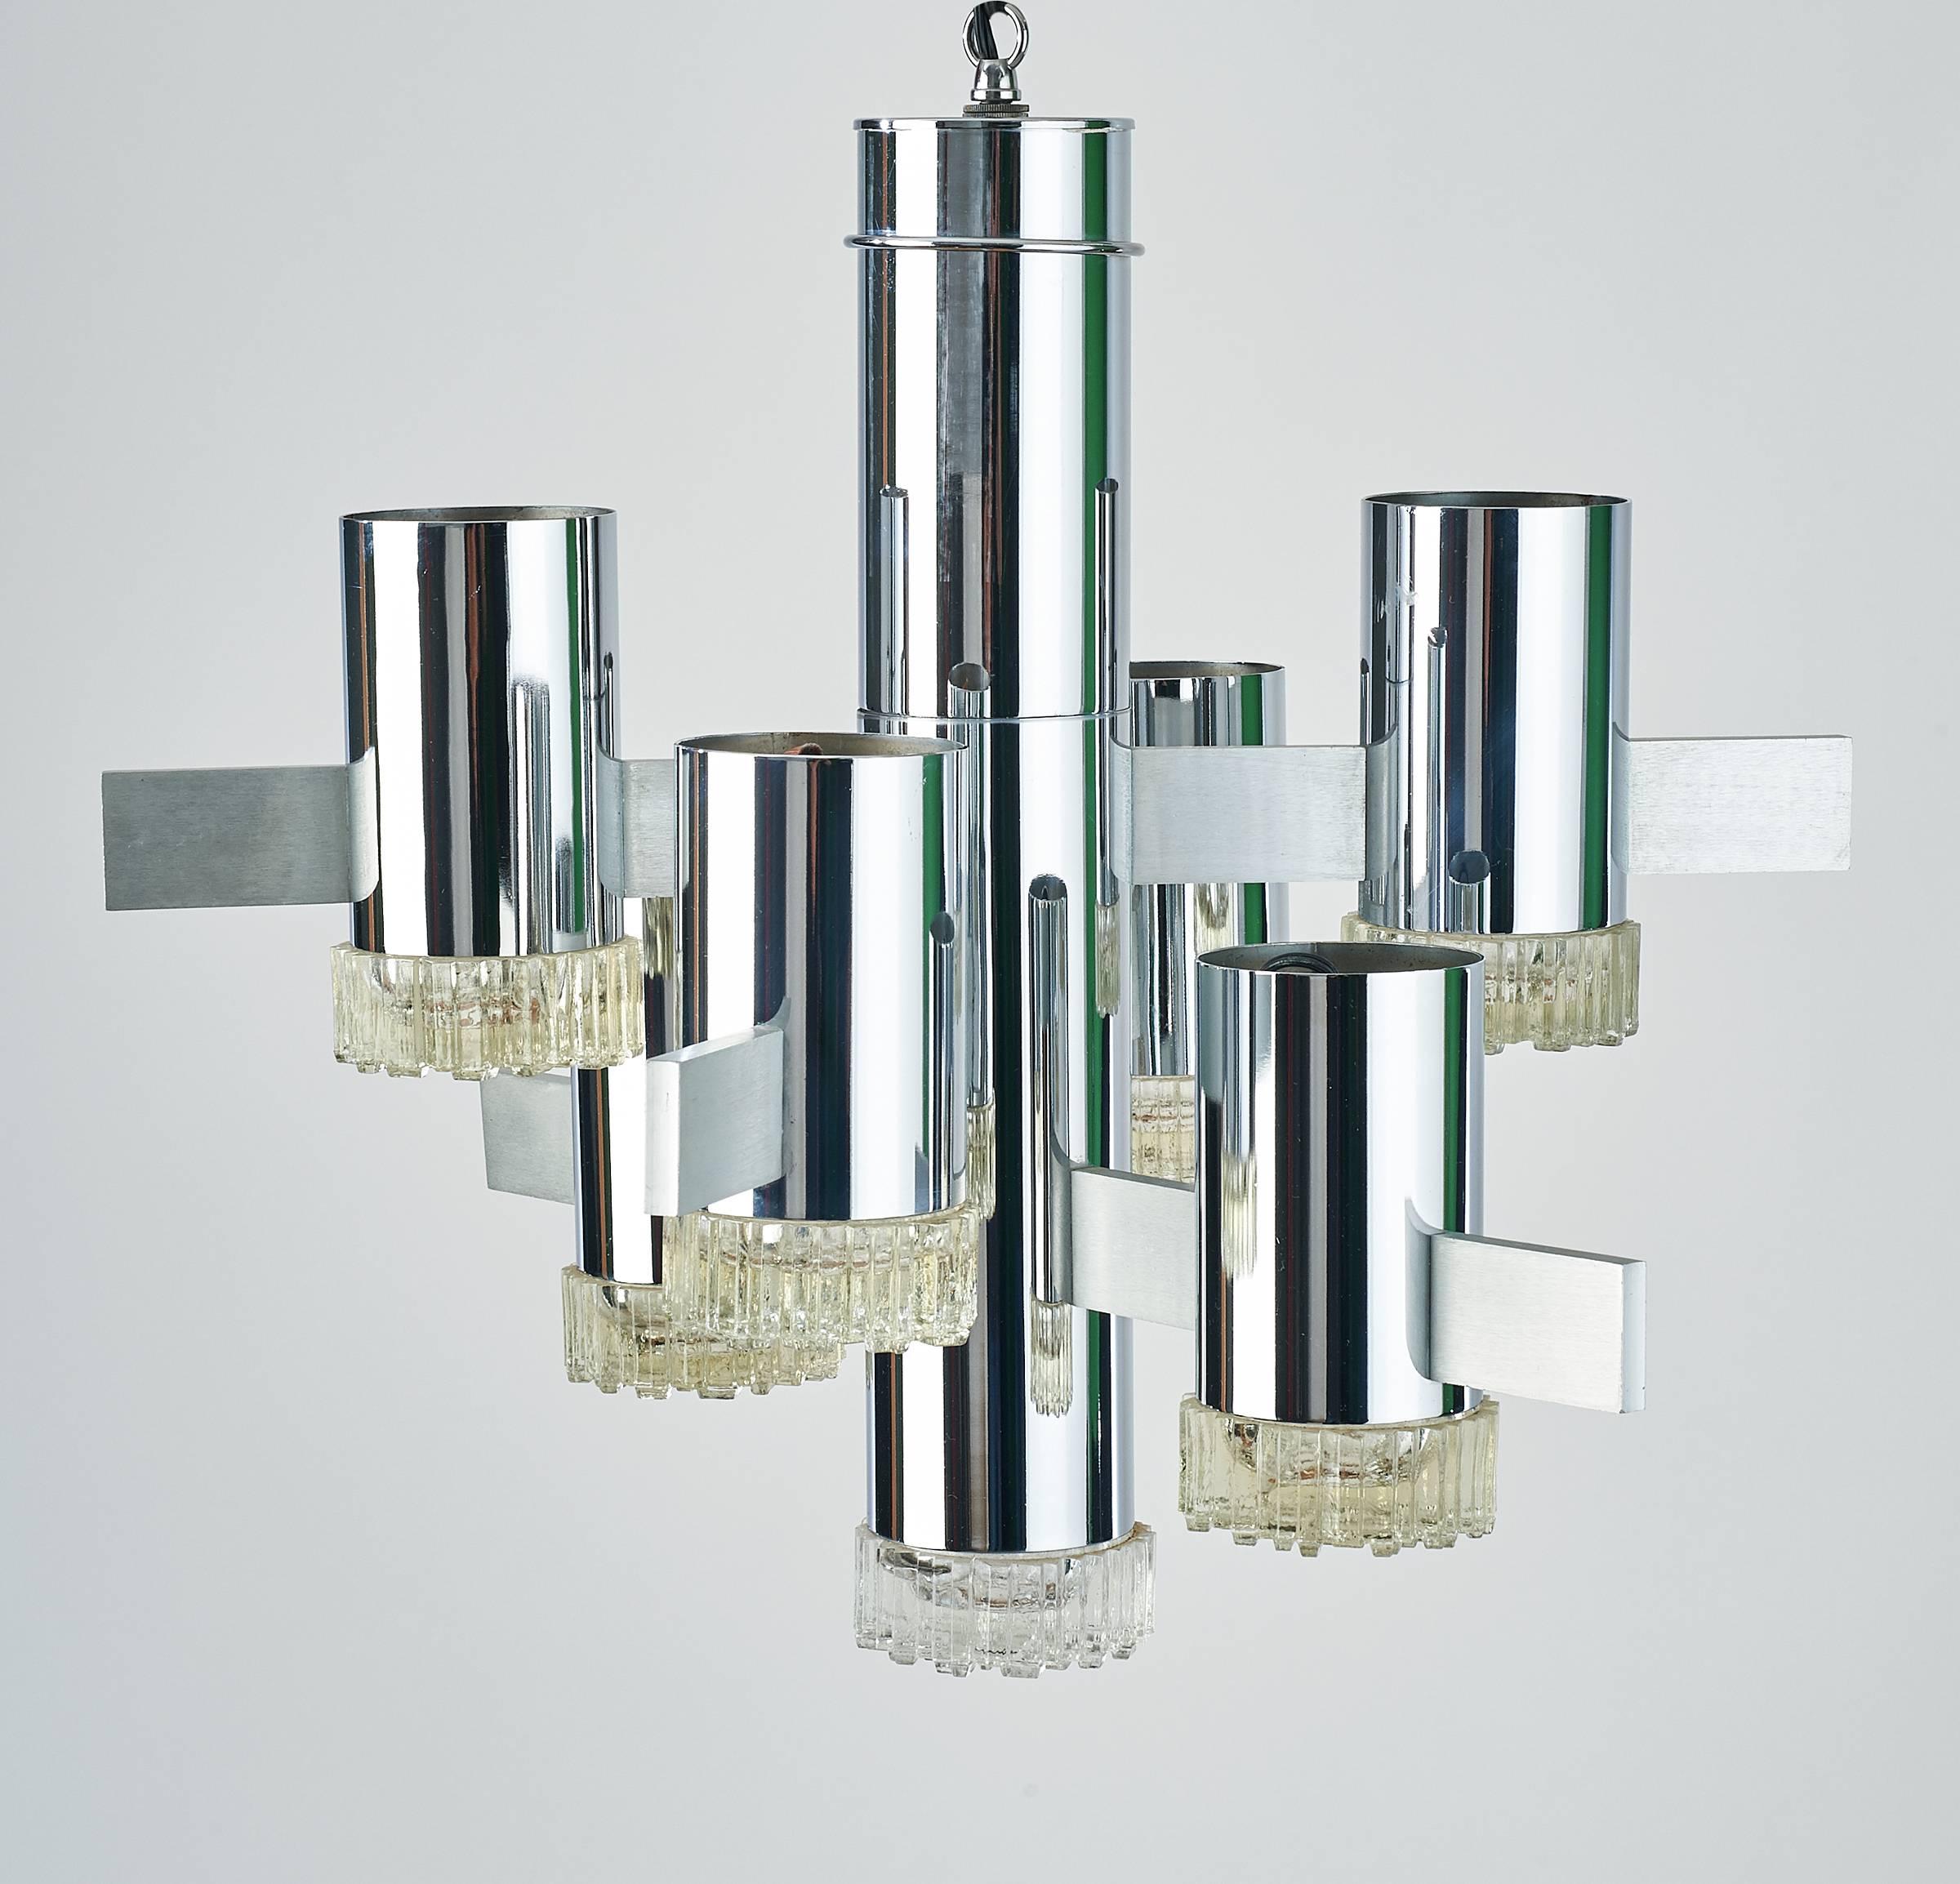 Gaetano Sciolari (1927–1994).

Asymmetrical seven-branch chandelier by Gaetano Sciolari, in chrome with cubist textured glass lenses and contrasting steel mounts.

Rewired for use in the U.S.